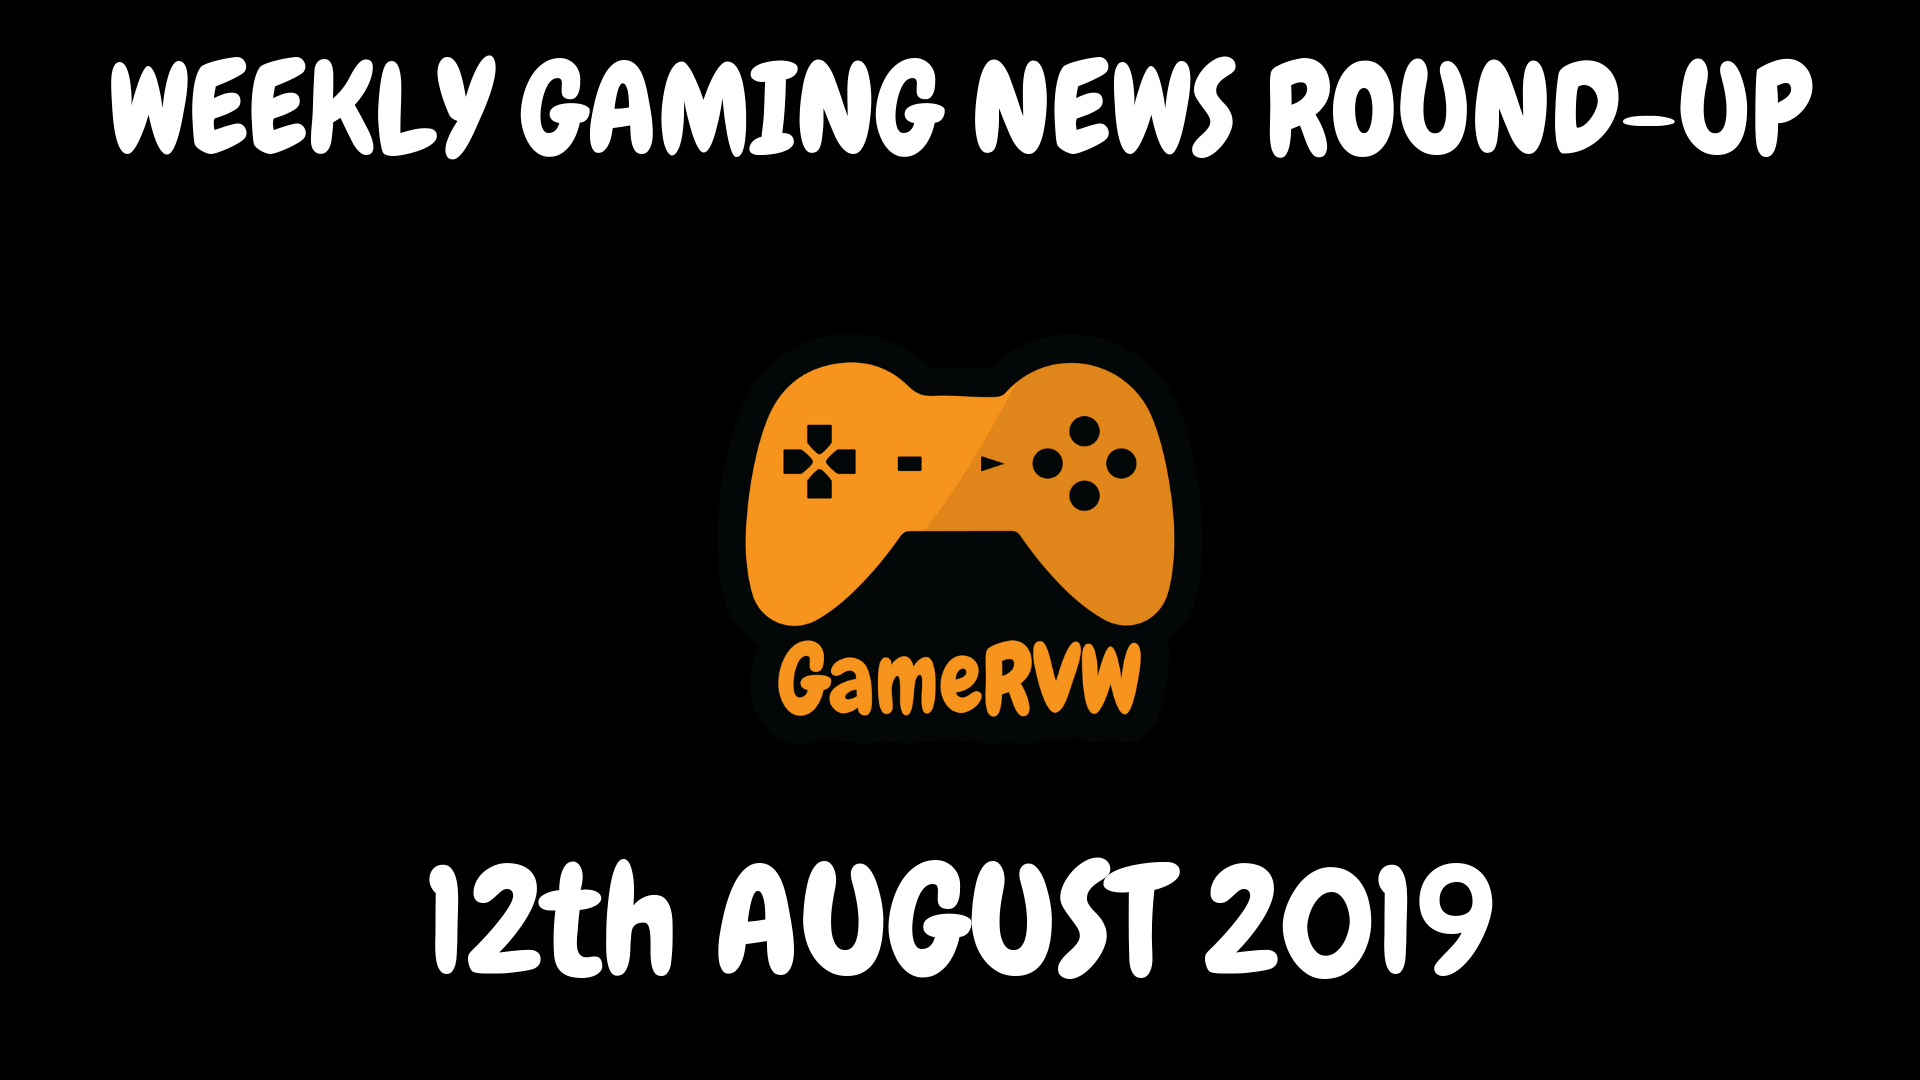 Gaming News of the Week